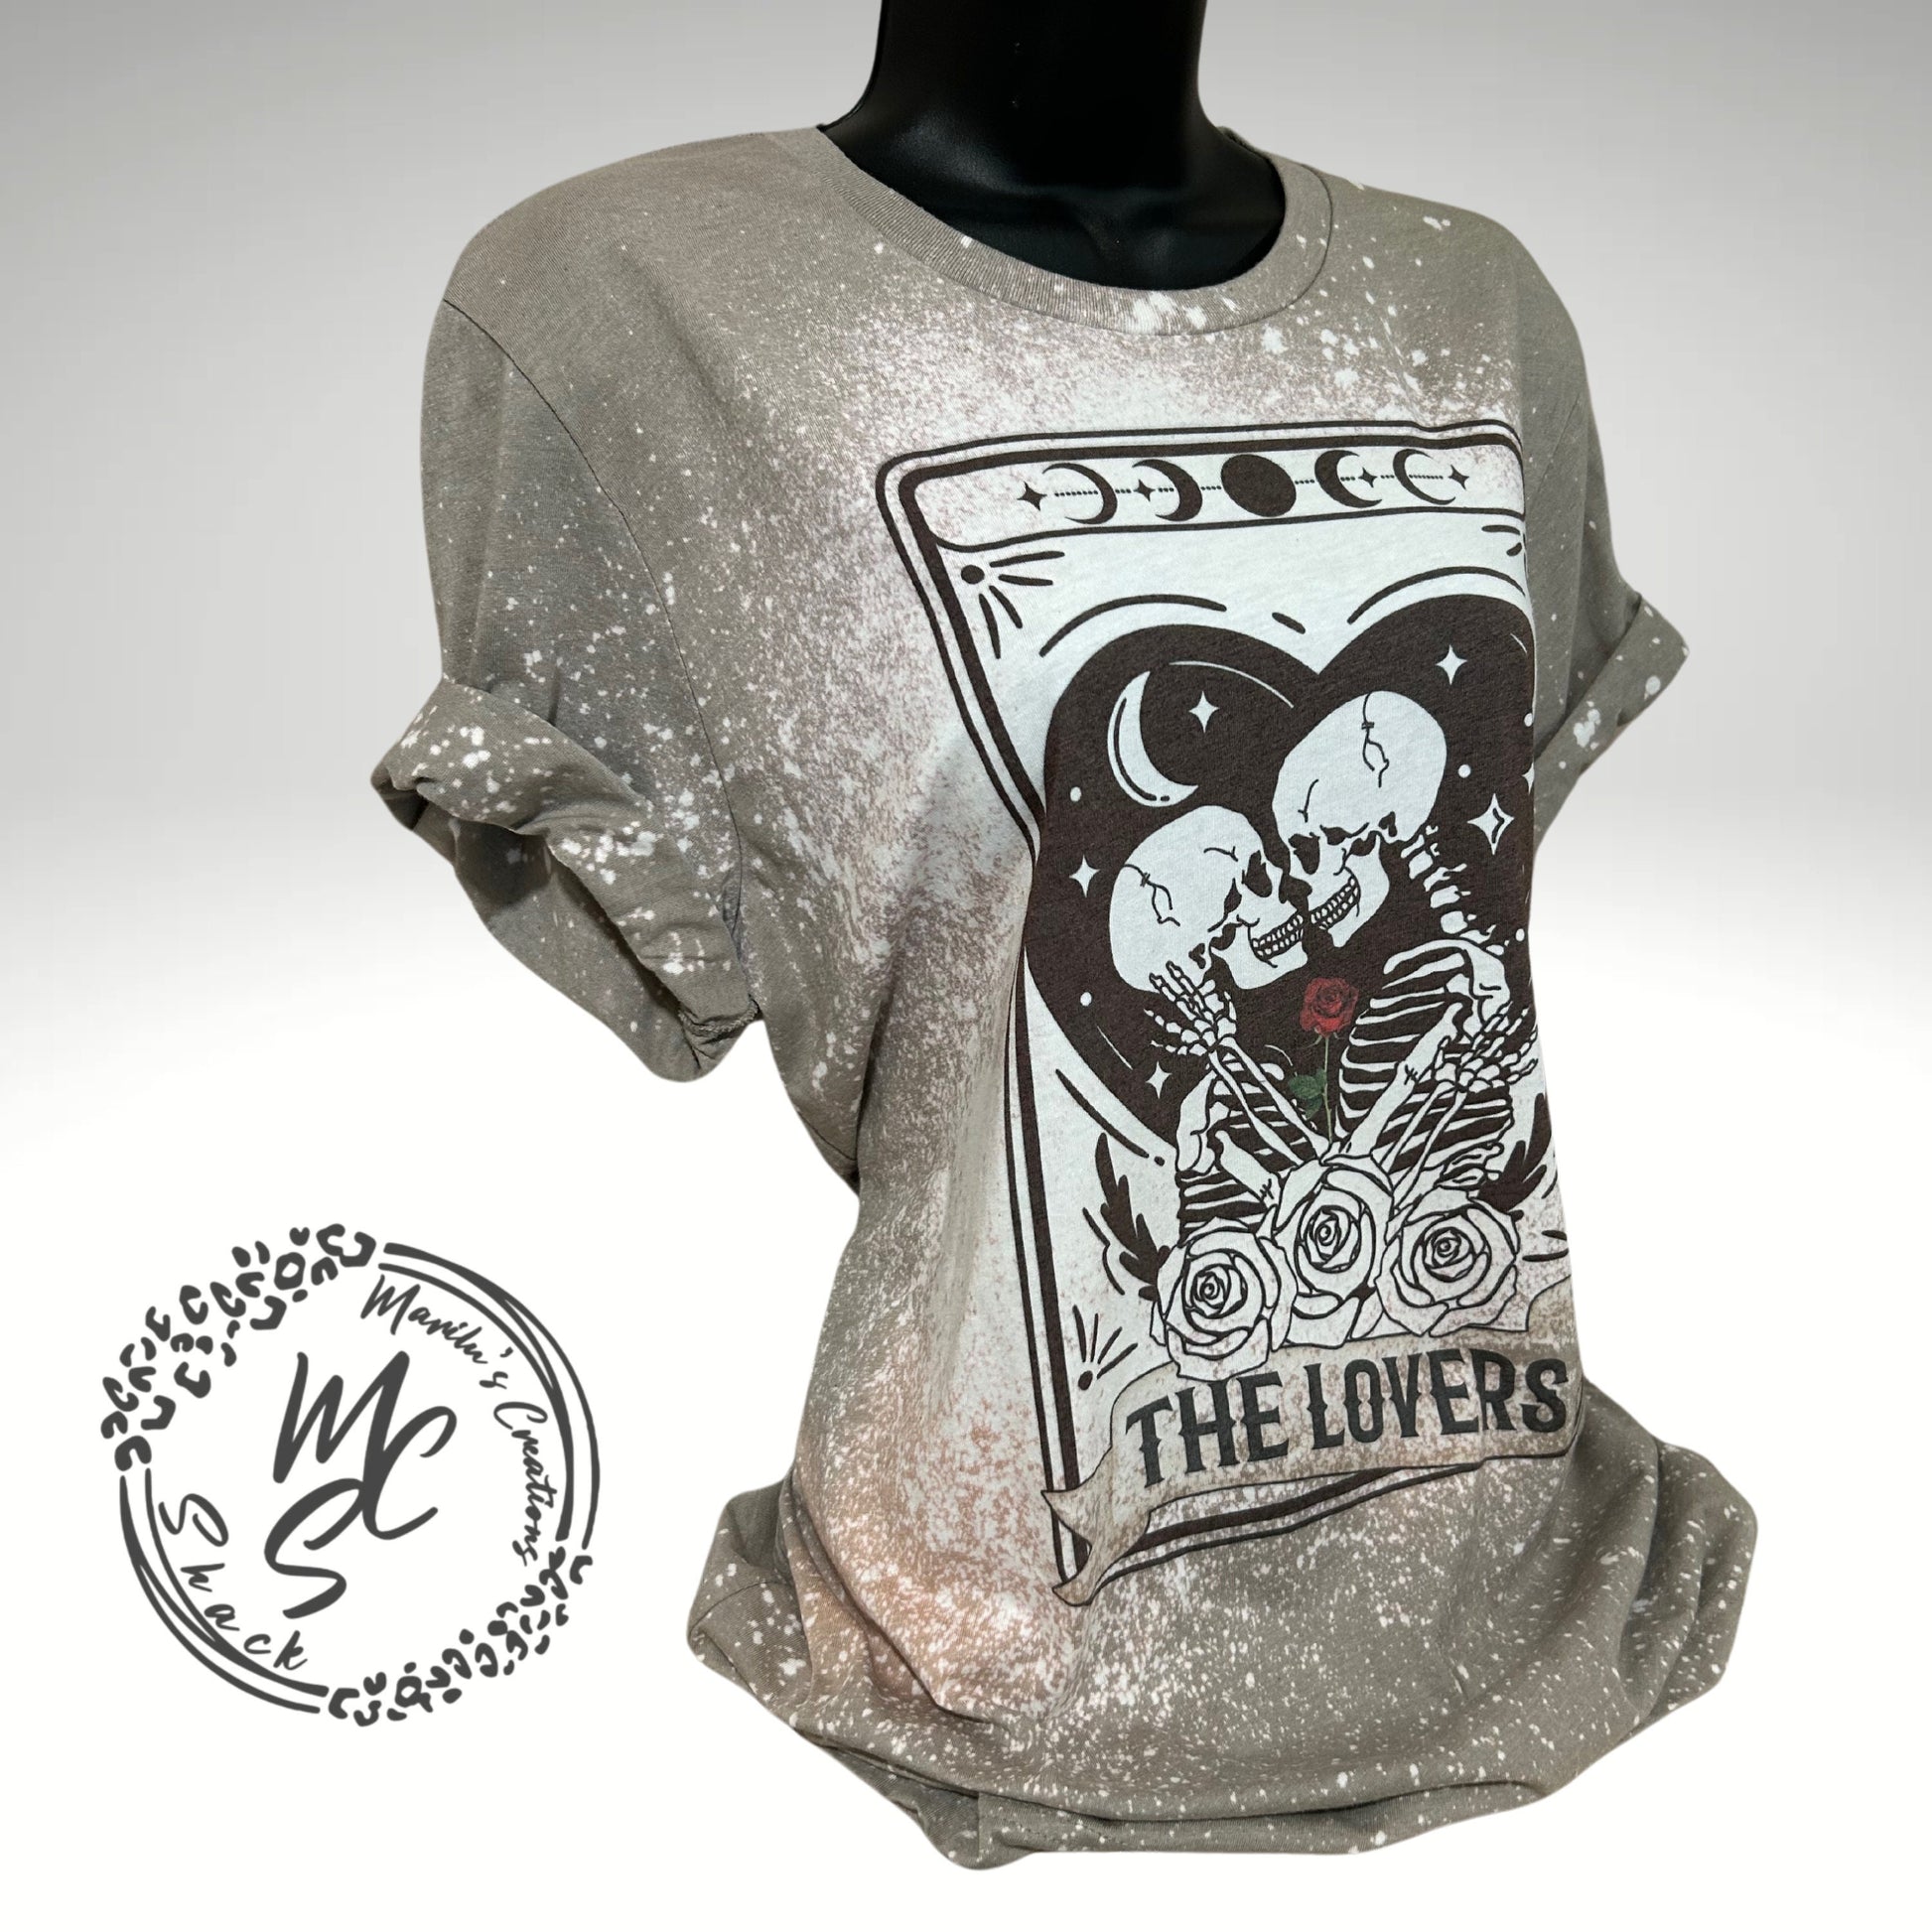 Tarot the lovers t-shirt, retro distressed skeleton lovers shirt, bleached tarot card tee, super soft top, gift for her or him.